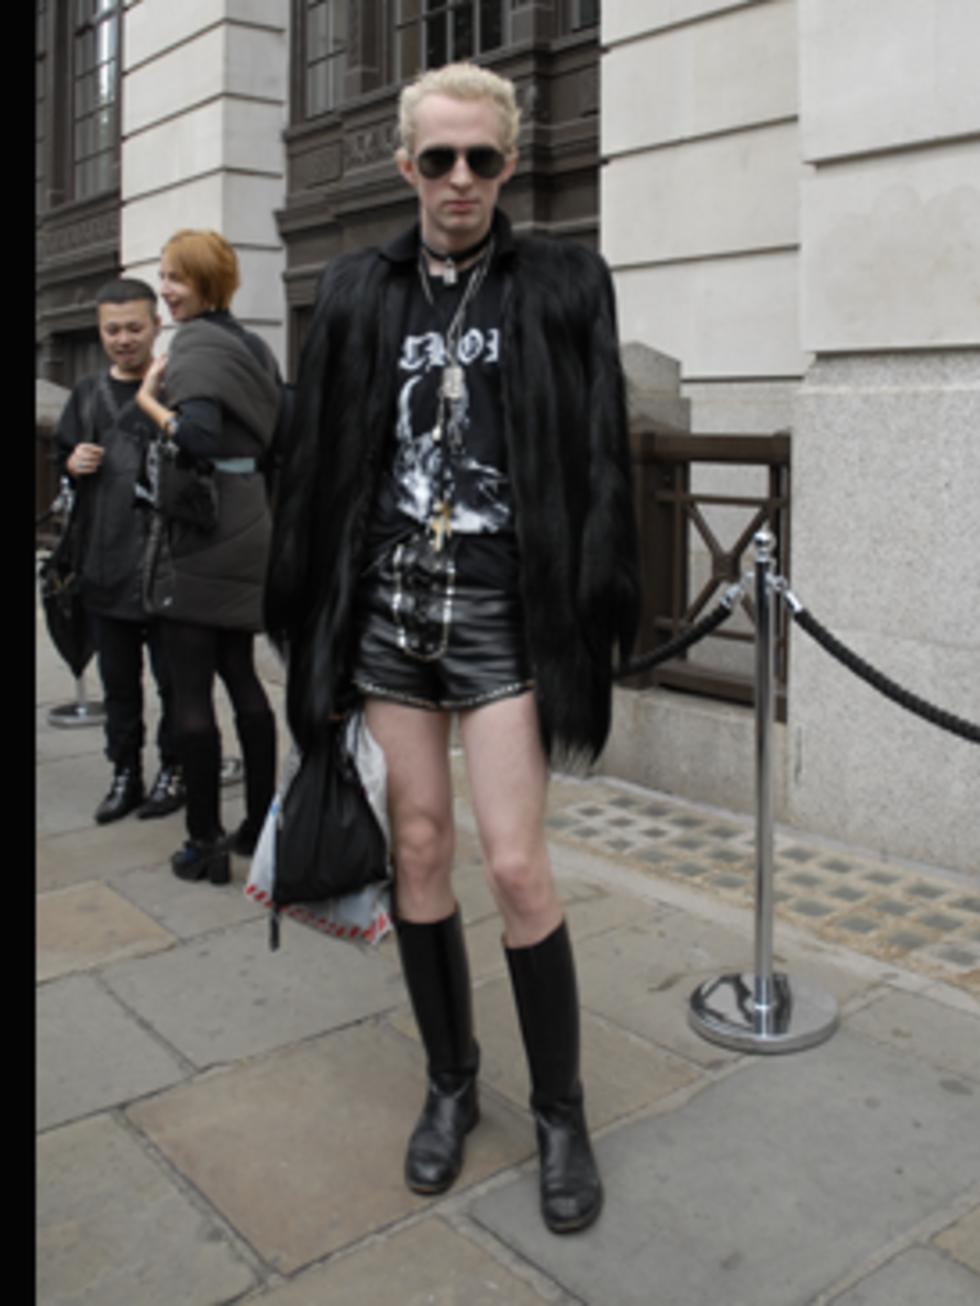 <p>Leather, studded shorts and knee high riding boots all add up to Andy's fetish vibe - very Gareth Pugh S/S 08.</p>